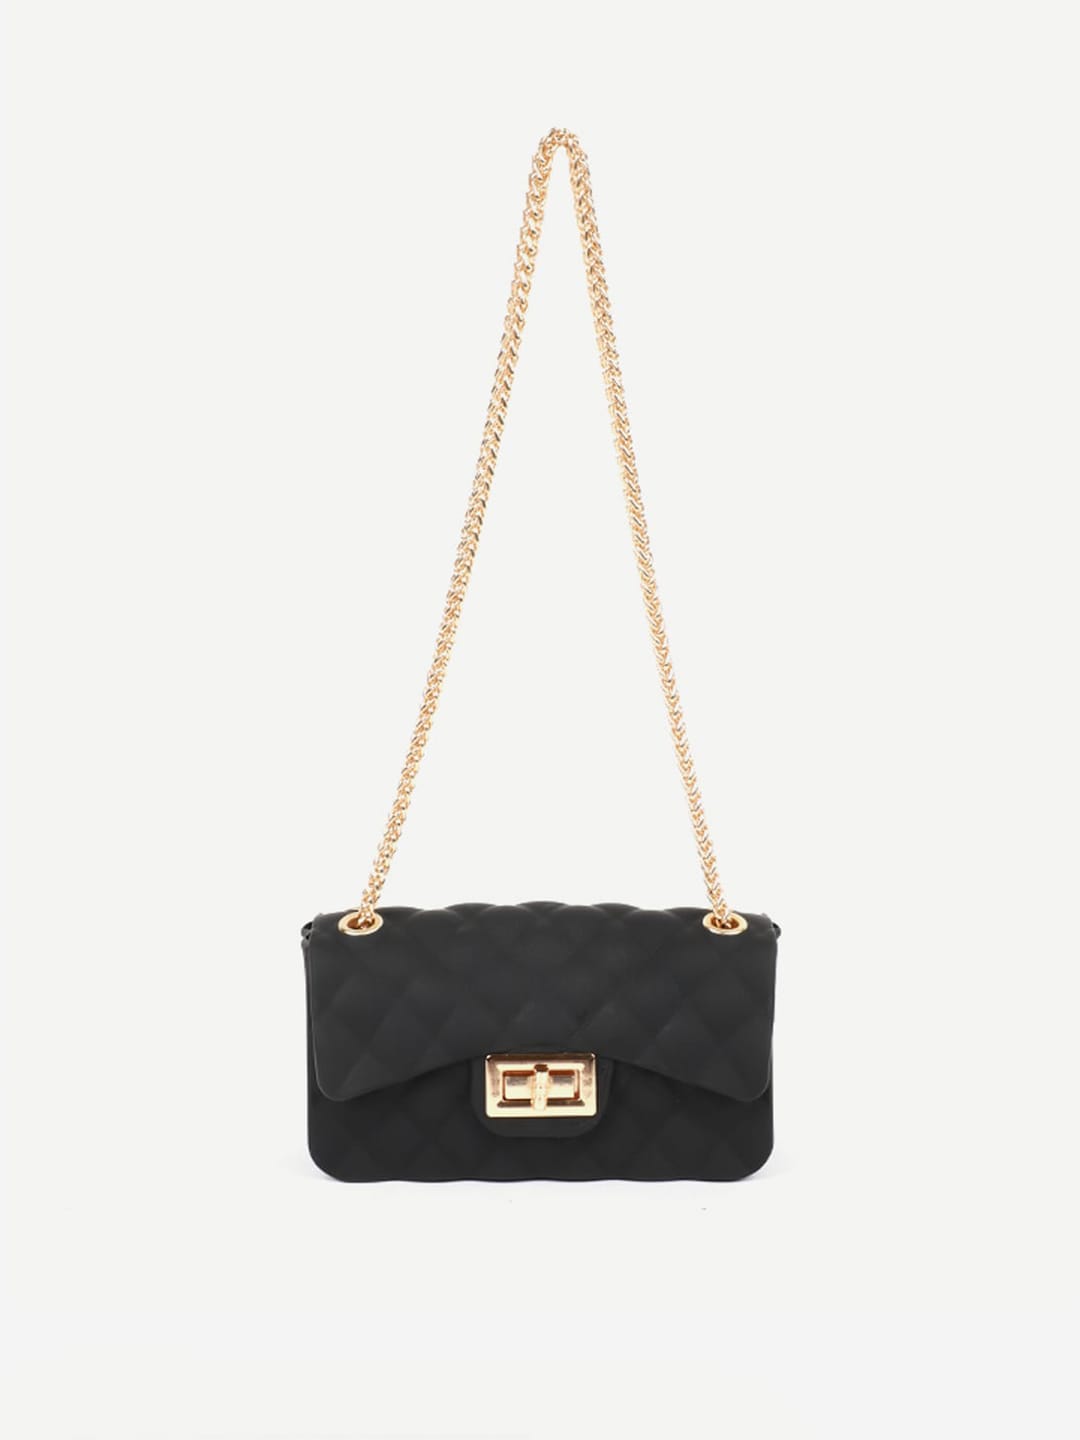 Carlton London Black Textured & Quilted Structured Sling Bag Price in India